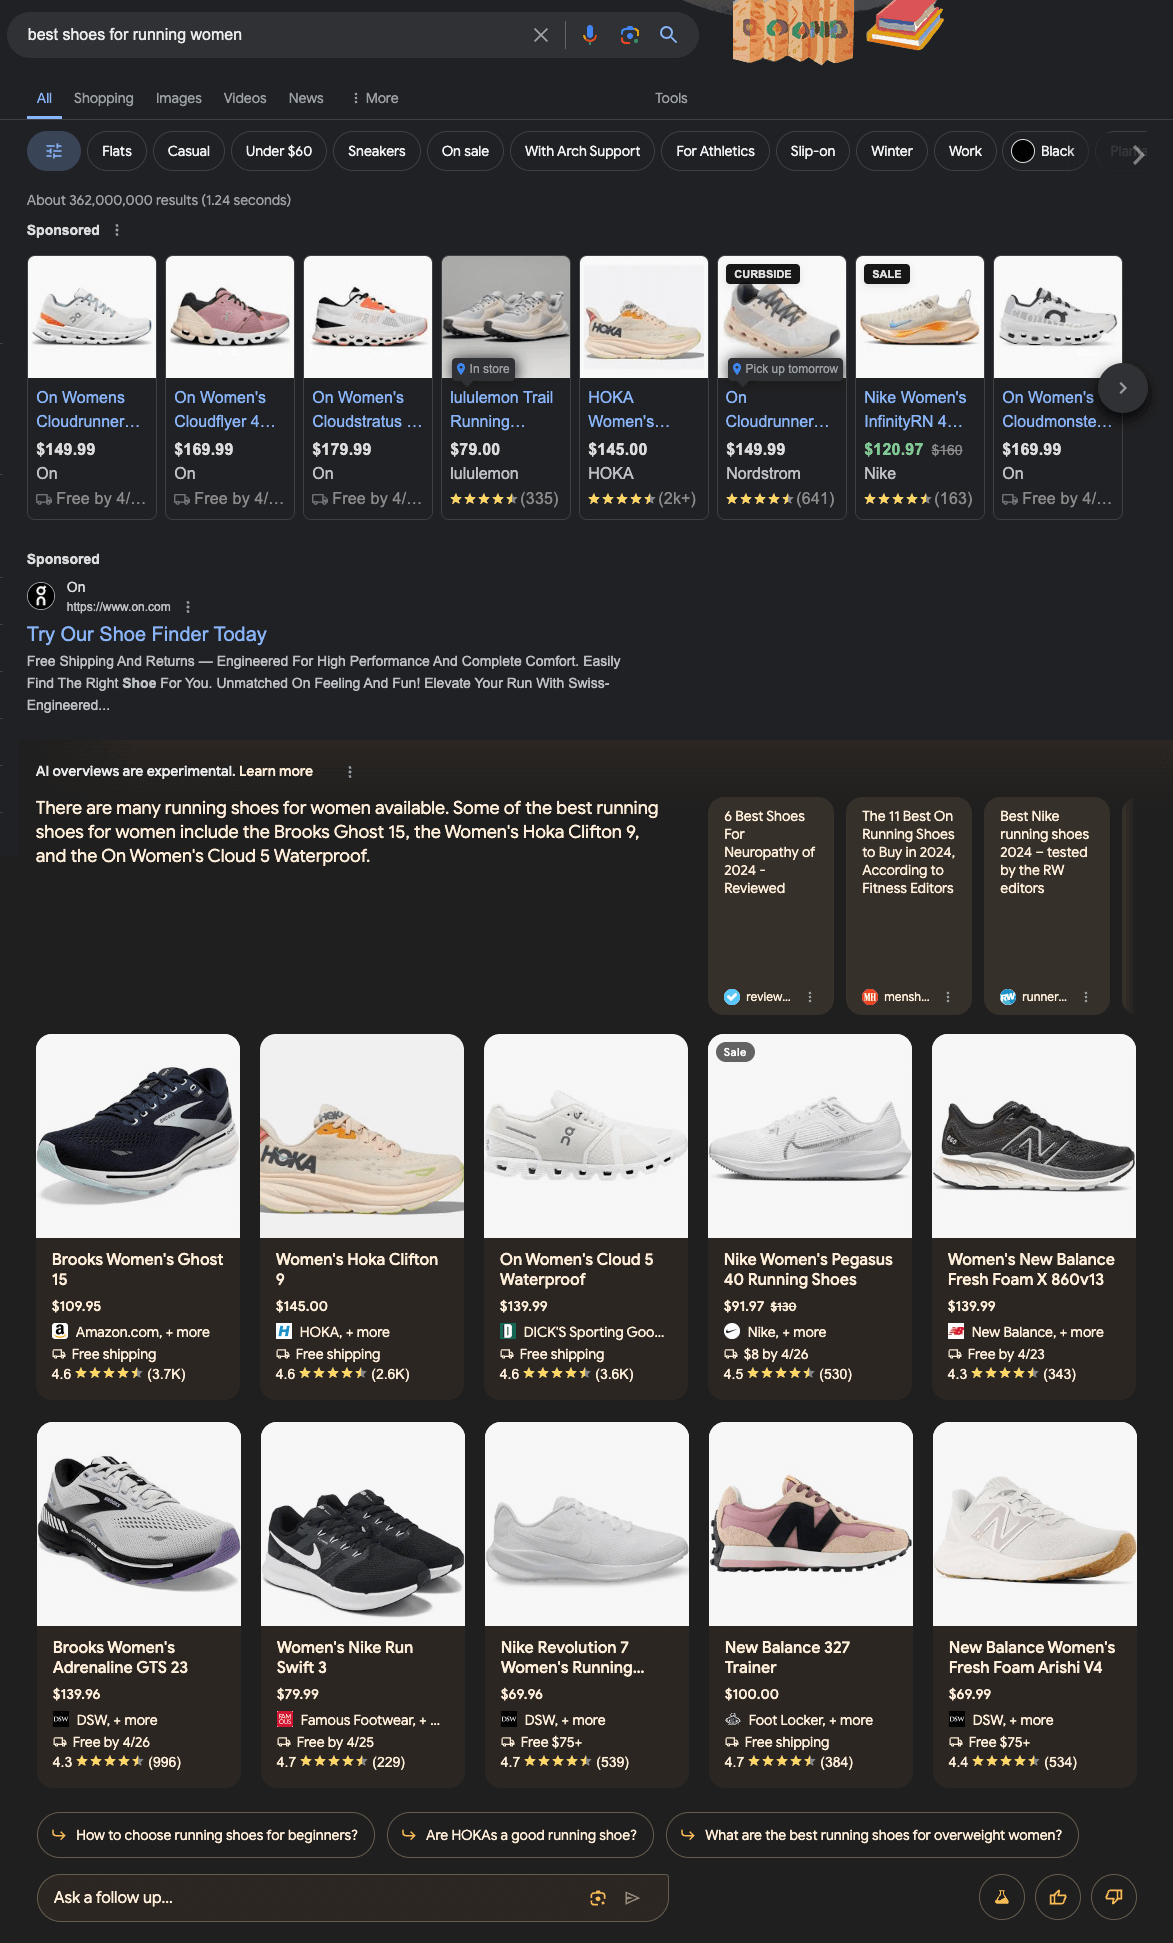 A.I. overview of Google search results for: best shoes for running women